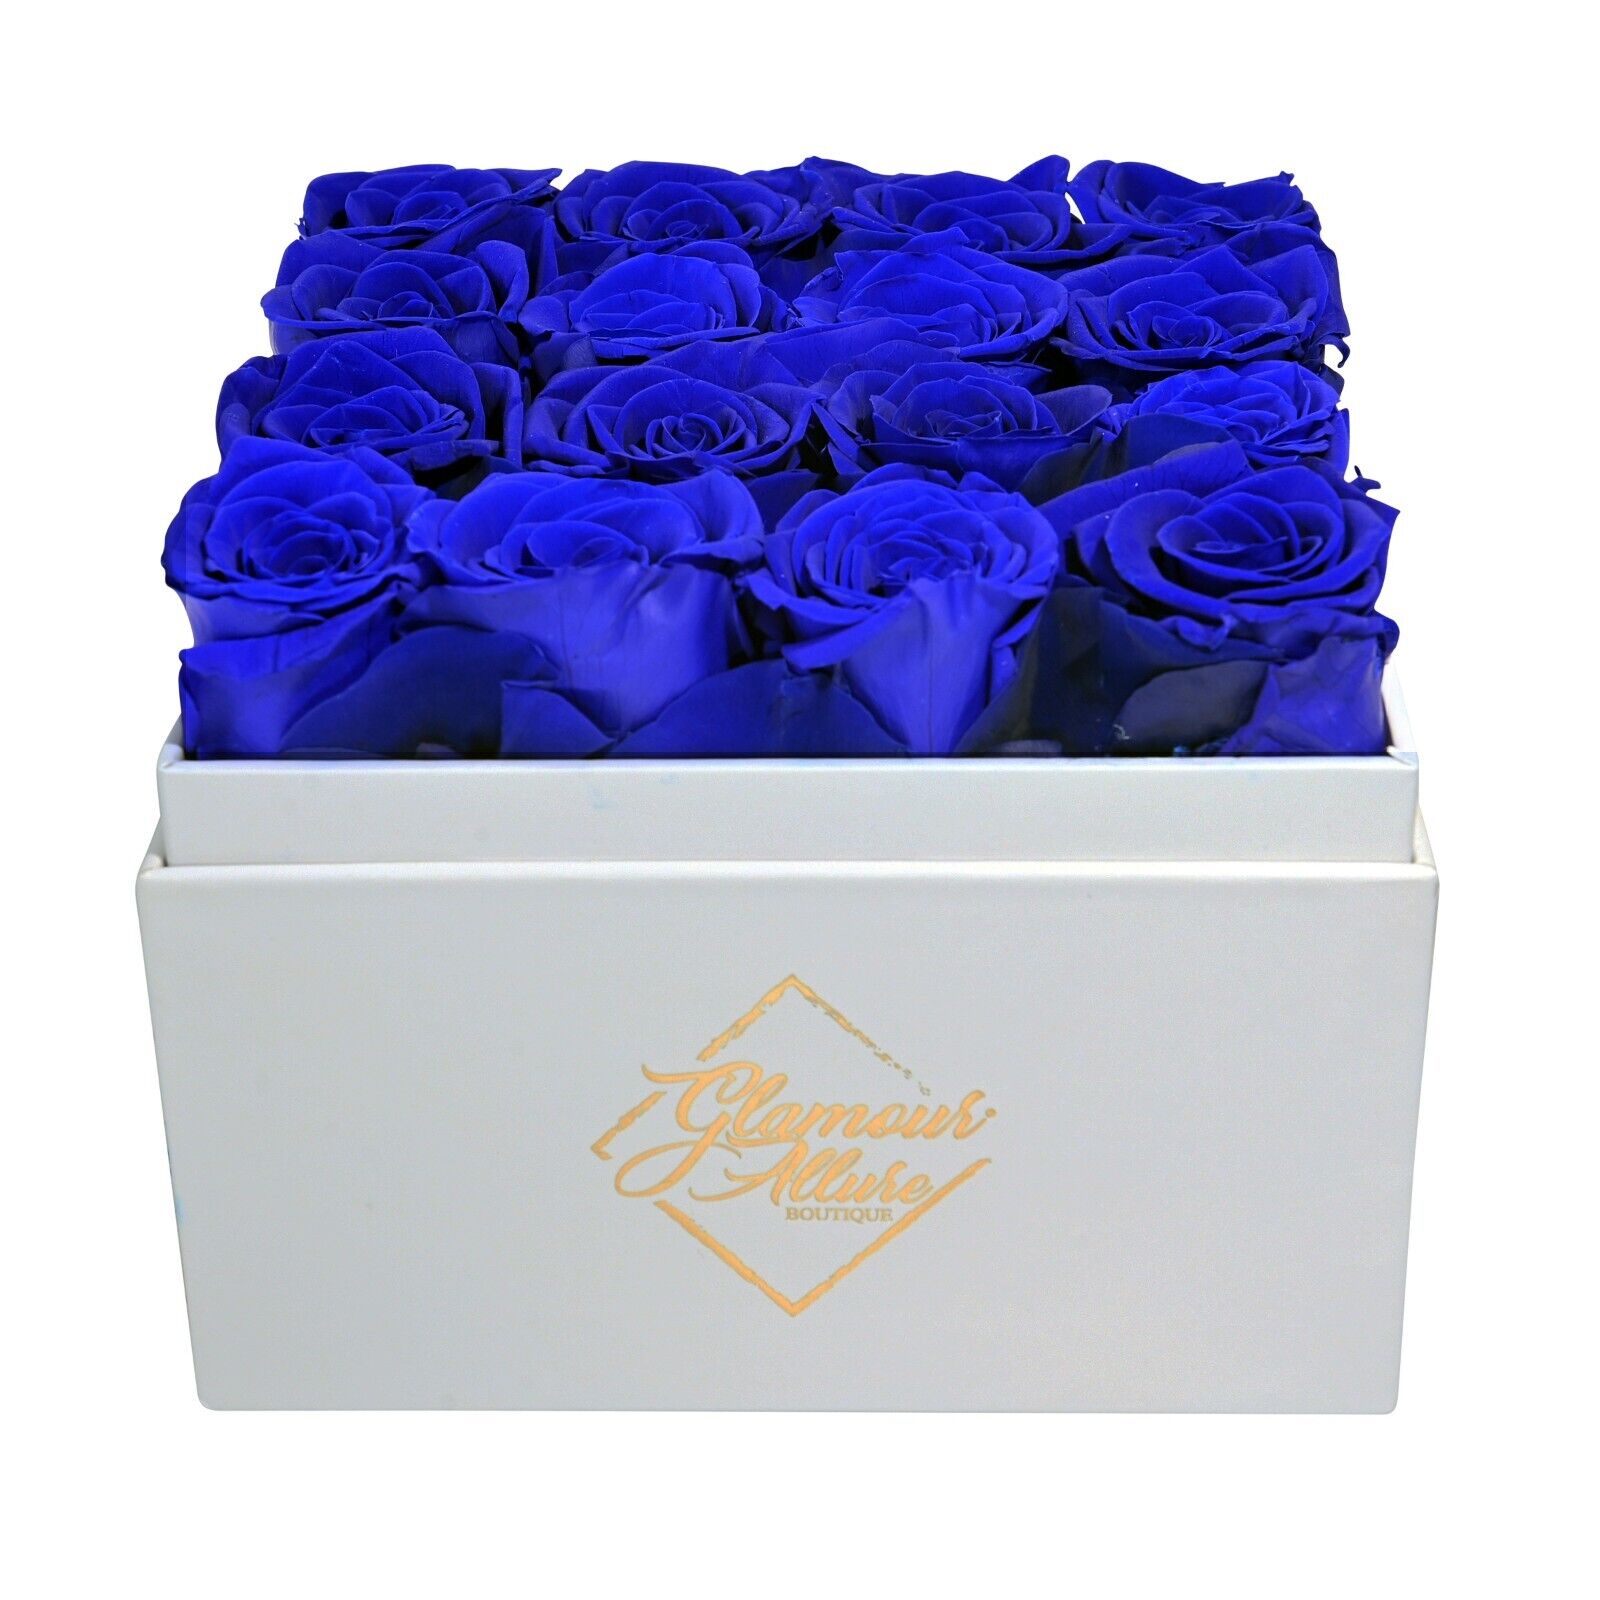 Handmade Preserved Real Roses in a Gift Box - 16 roses - Preserved Flowers Glamour Allure Boutoque - фотография #4